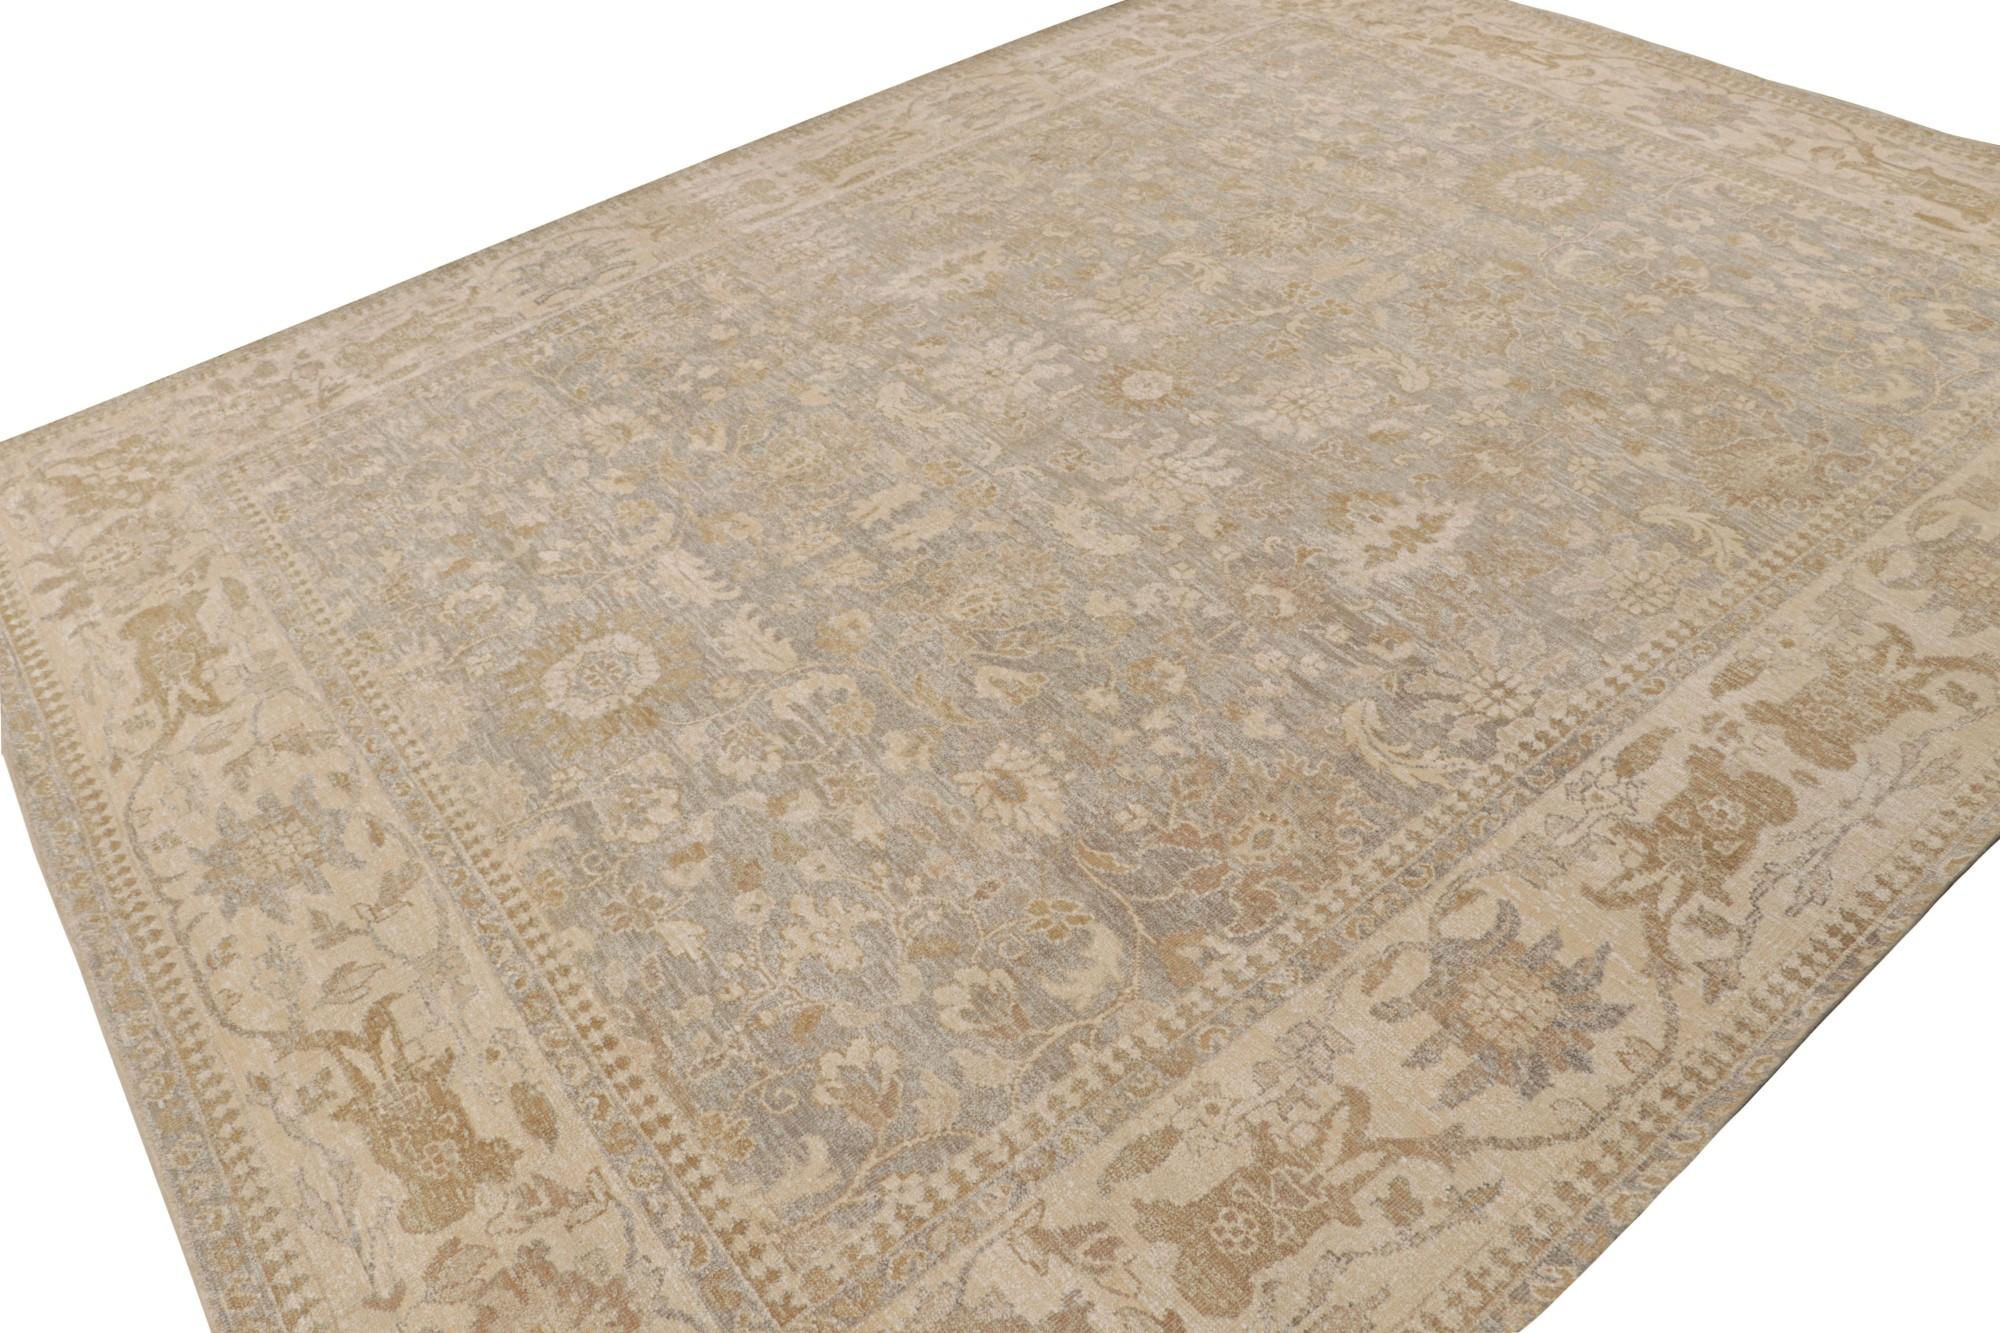 This 12x15 rug from the Modern Classics Collection by Rug & Kilim is from a new line inspired by antique Oushak rugs. Hand-knotted in wool & sari silk, its design enjoys beige, gold & gray floral patterns.  

On the Design: 

The rug is made with a